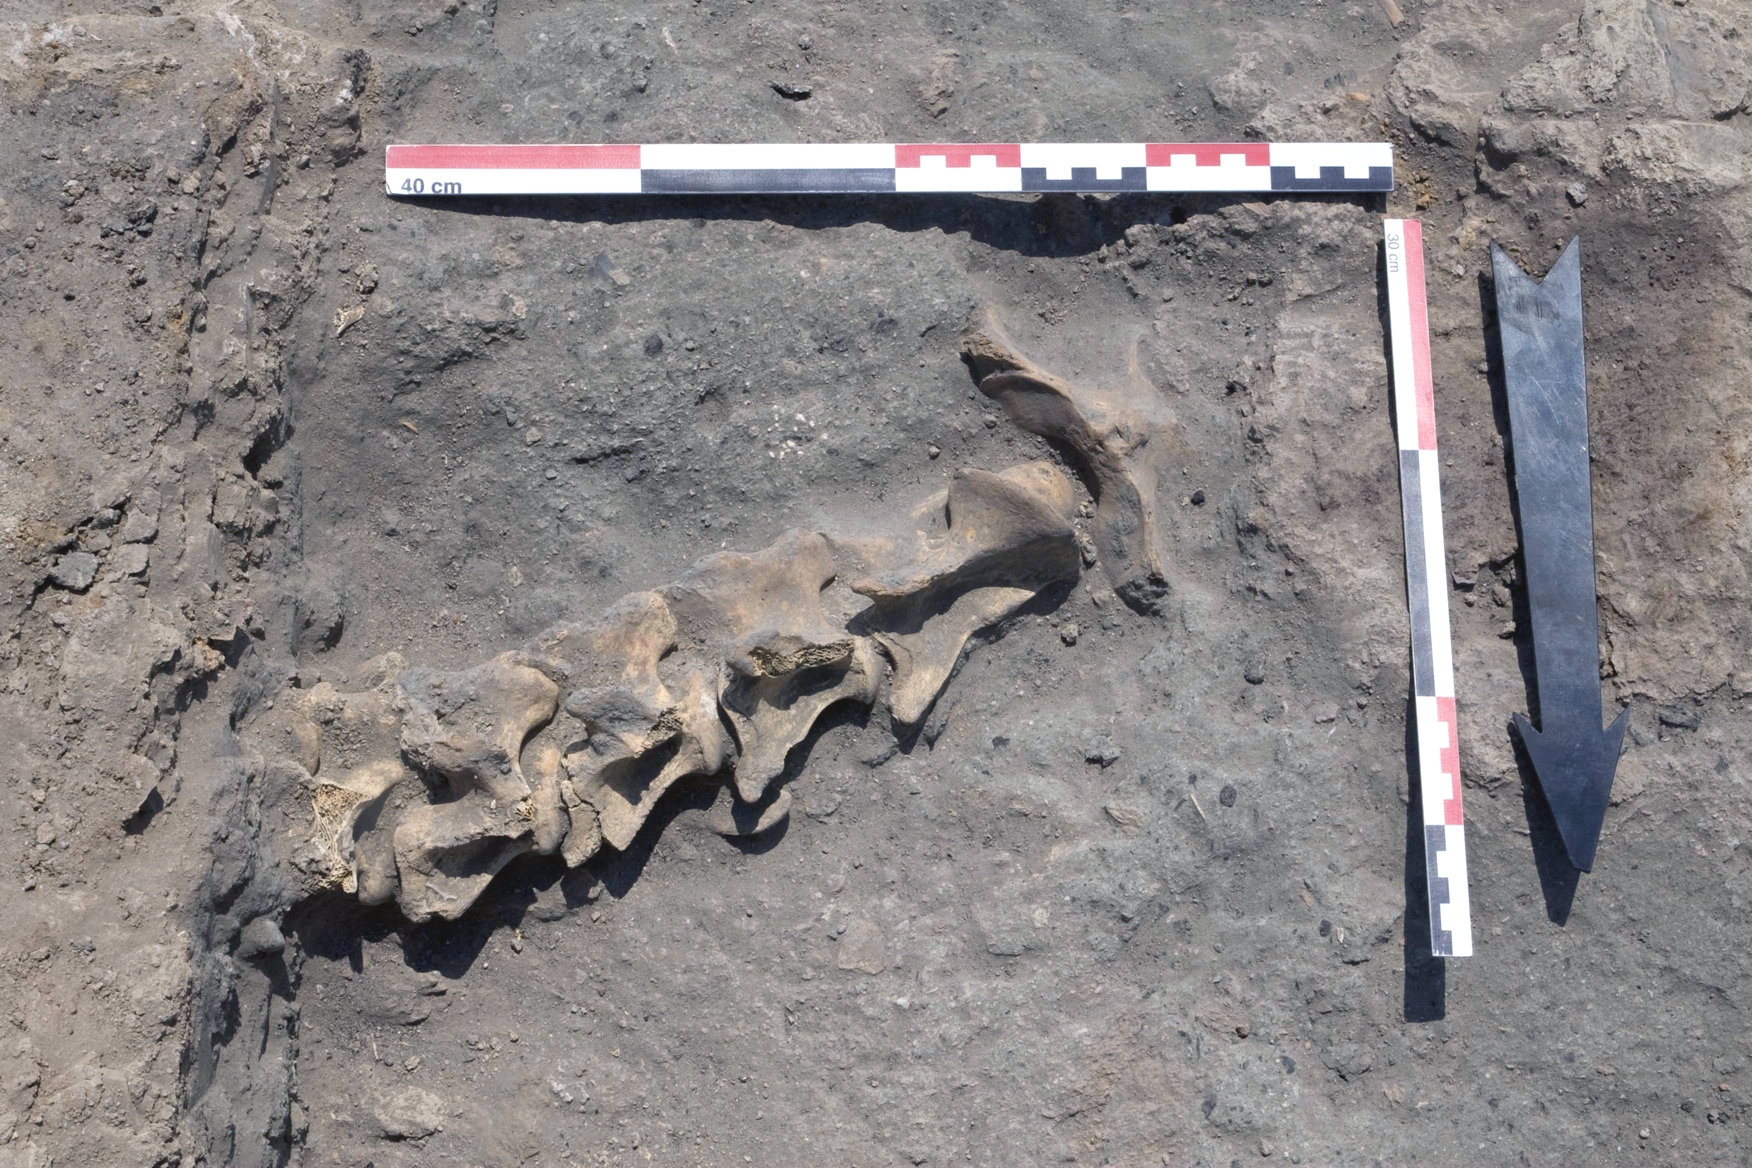 Articulated vertebral elements of cattle in the Eastern Midden.